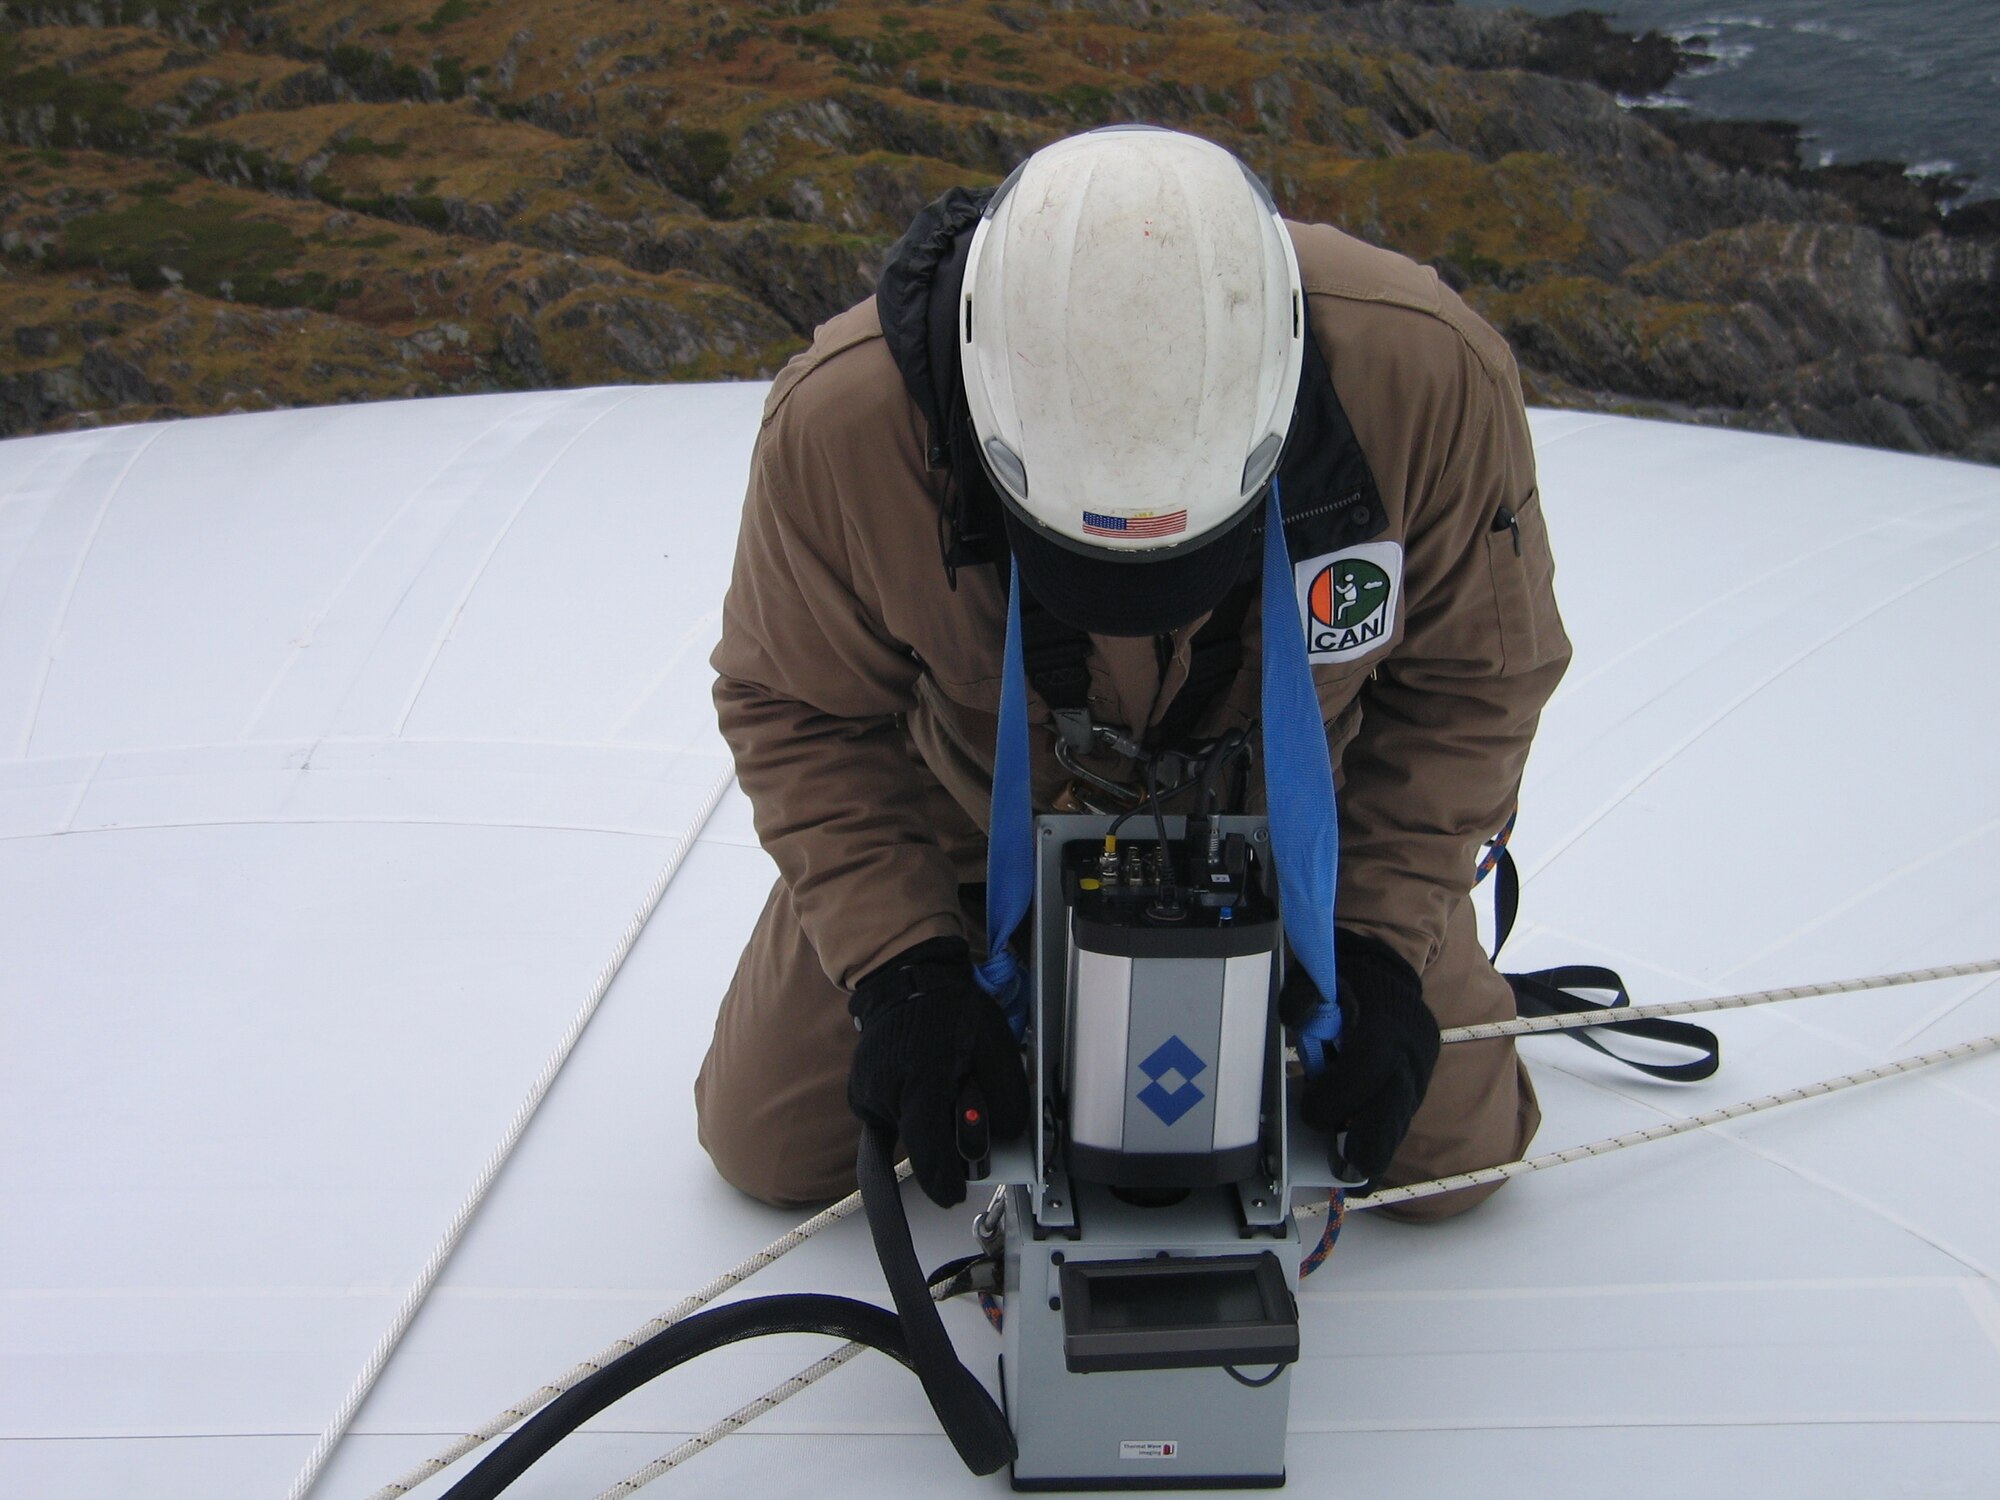 Mr. Kenneth LaCivita, an AFRL/RX engineer performs a thermography inspection in Vardo, Norway.